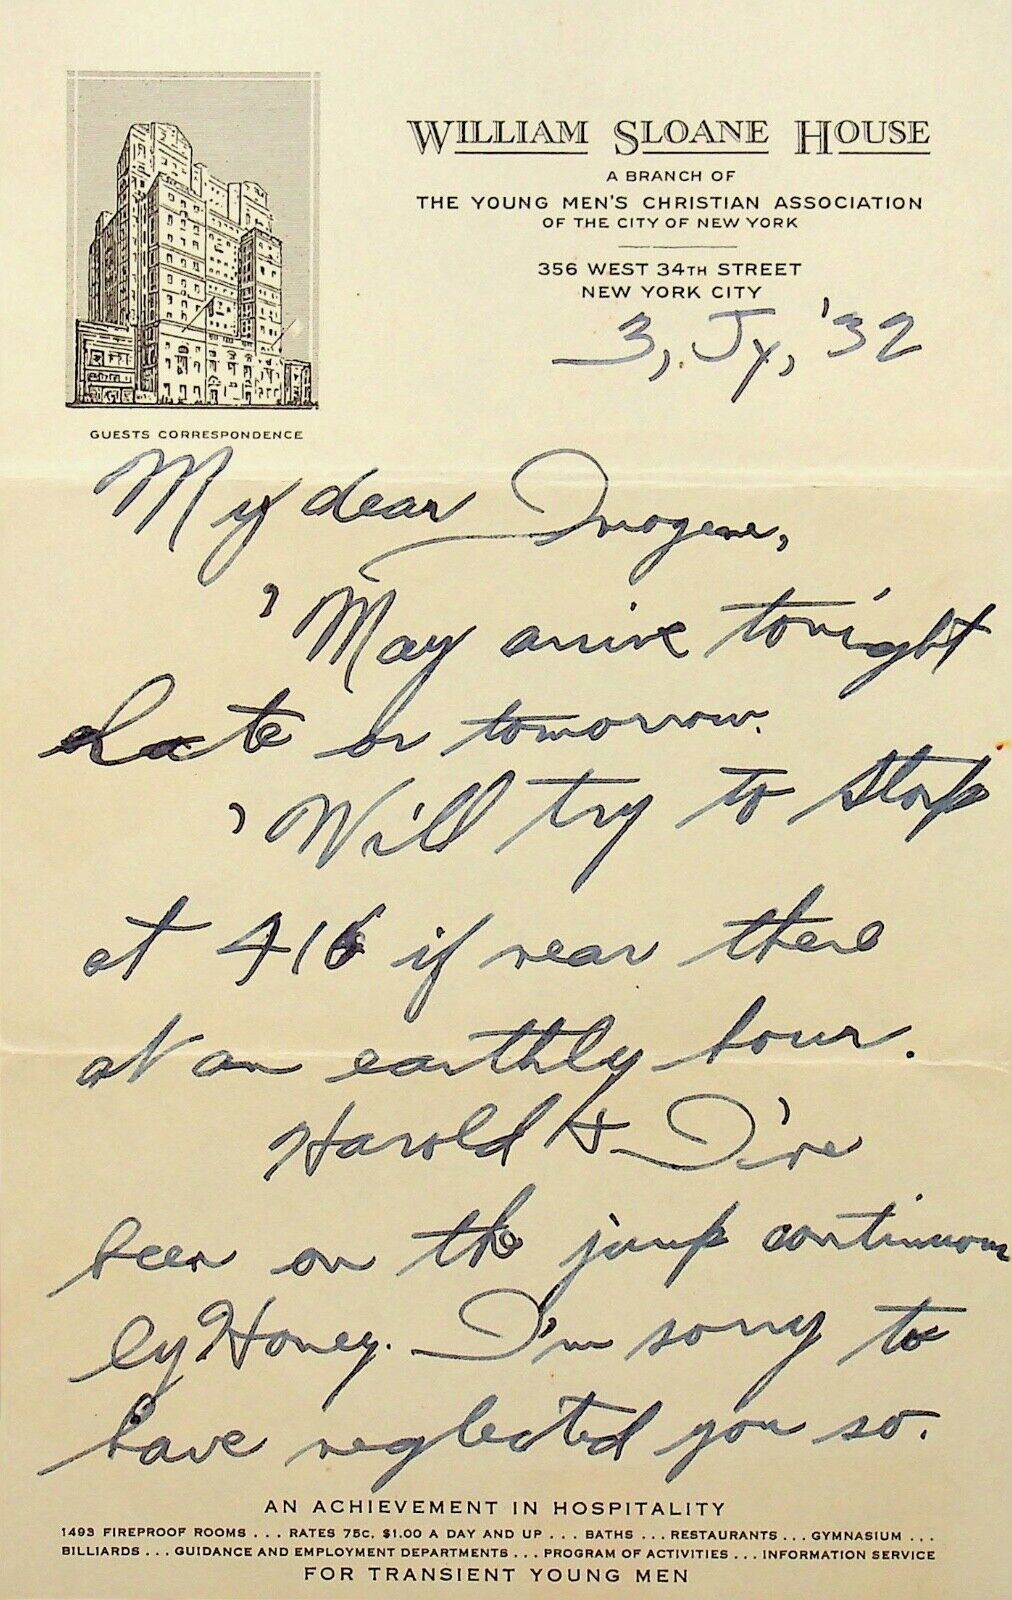 1932 NYC William Sloane House Y.M.C.A. Letter on Sloane House Stationary - E11-G